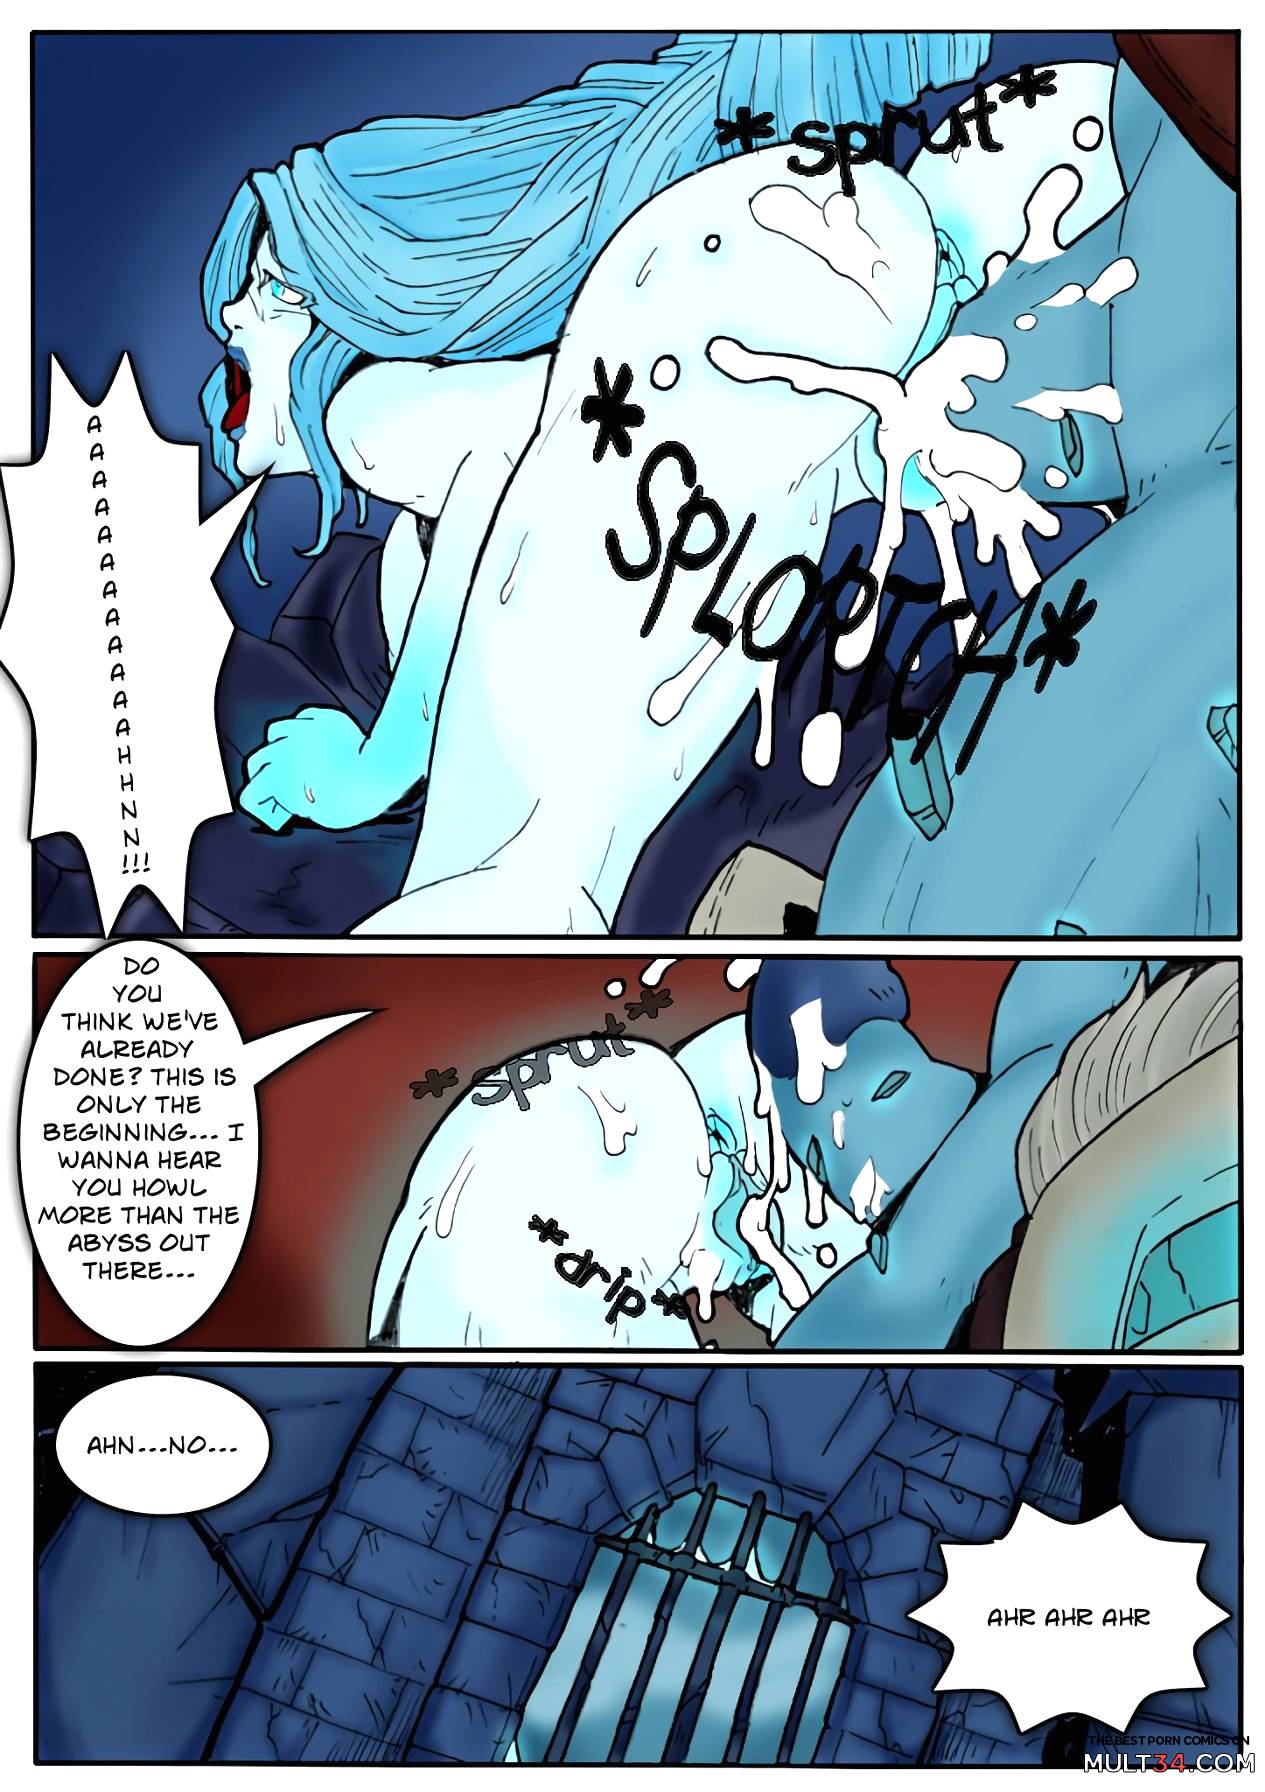 Tales of the Troll King ch. 1 - 3 ] [Colorized] page 15